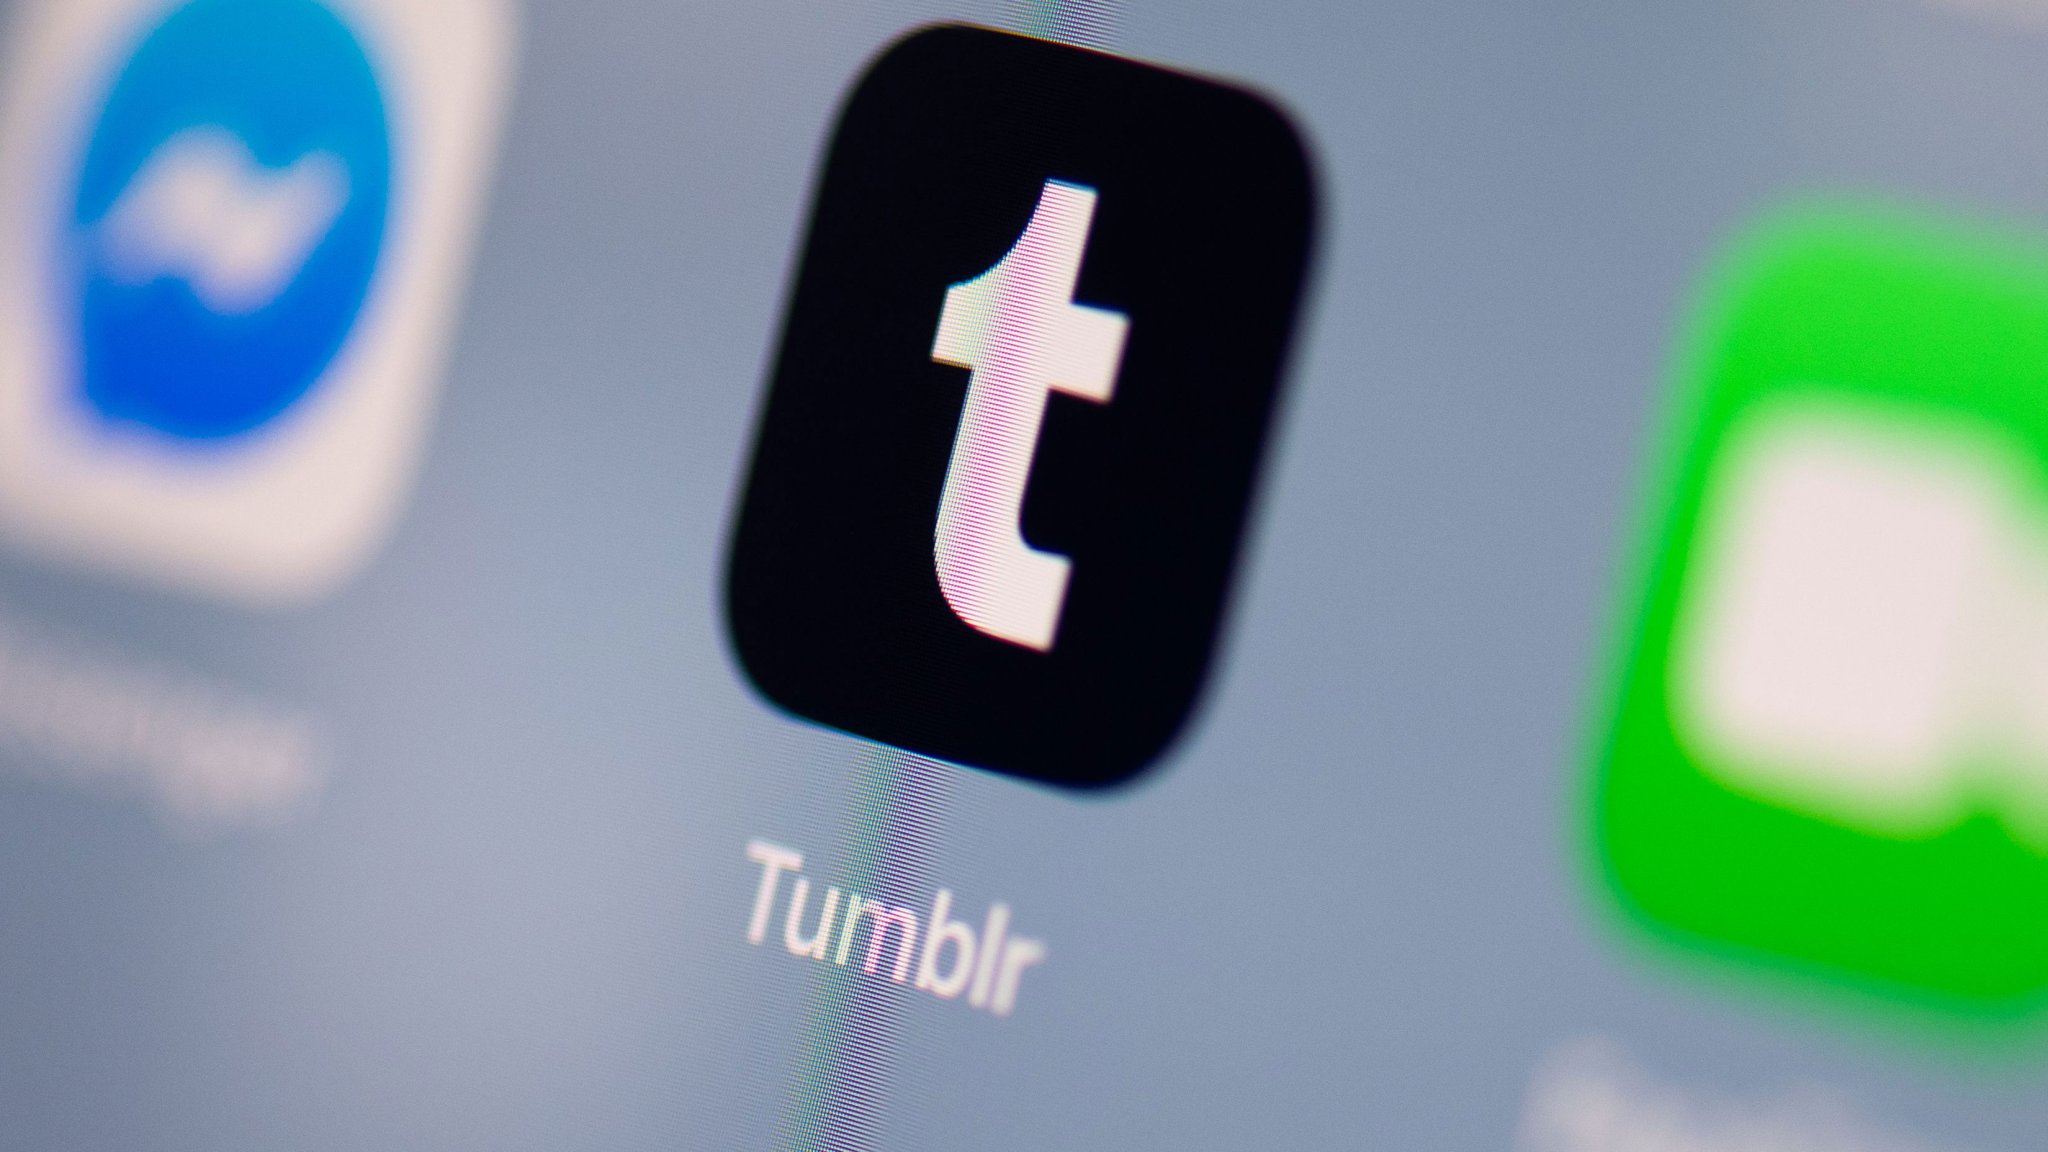 Tumblr to add support for ActivityPub, the social protocol powering Mastodon and other apps